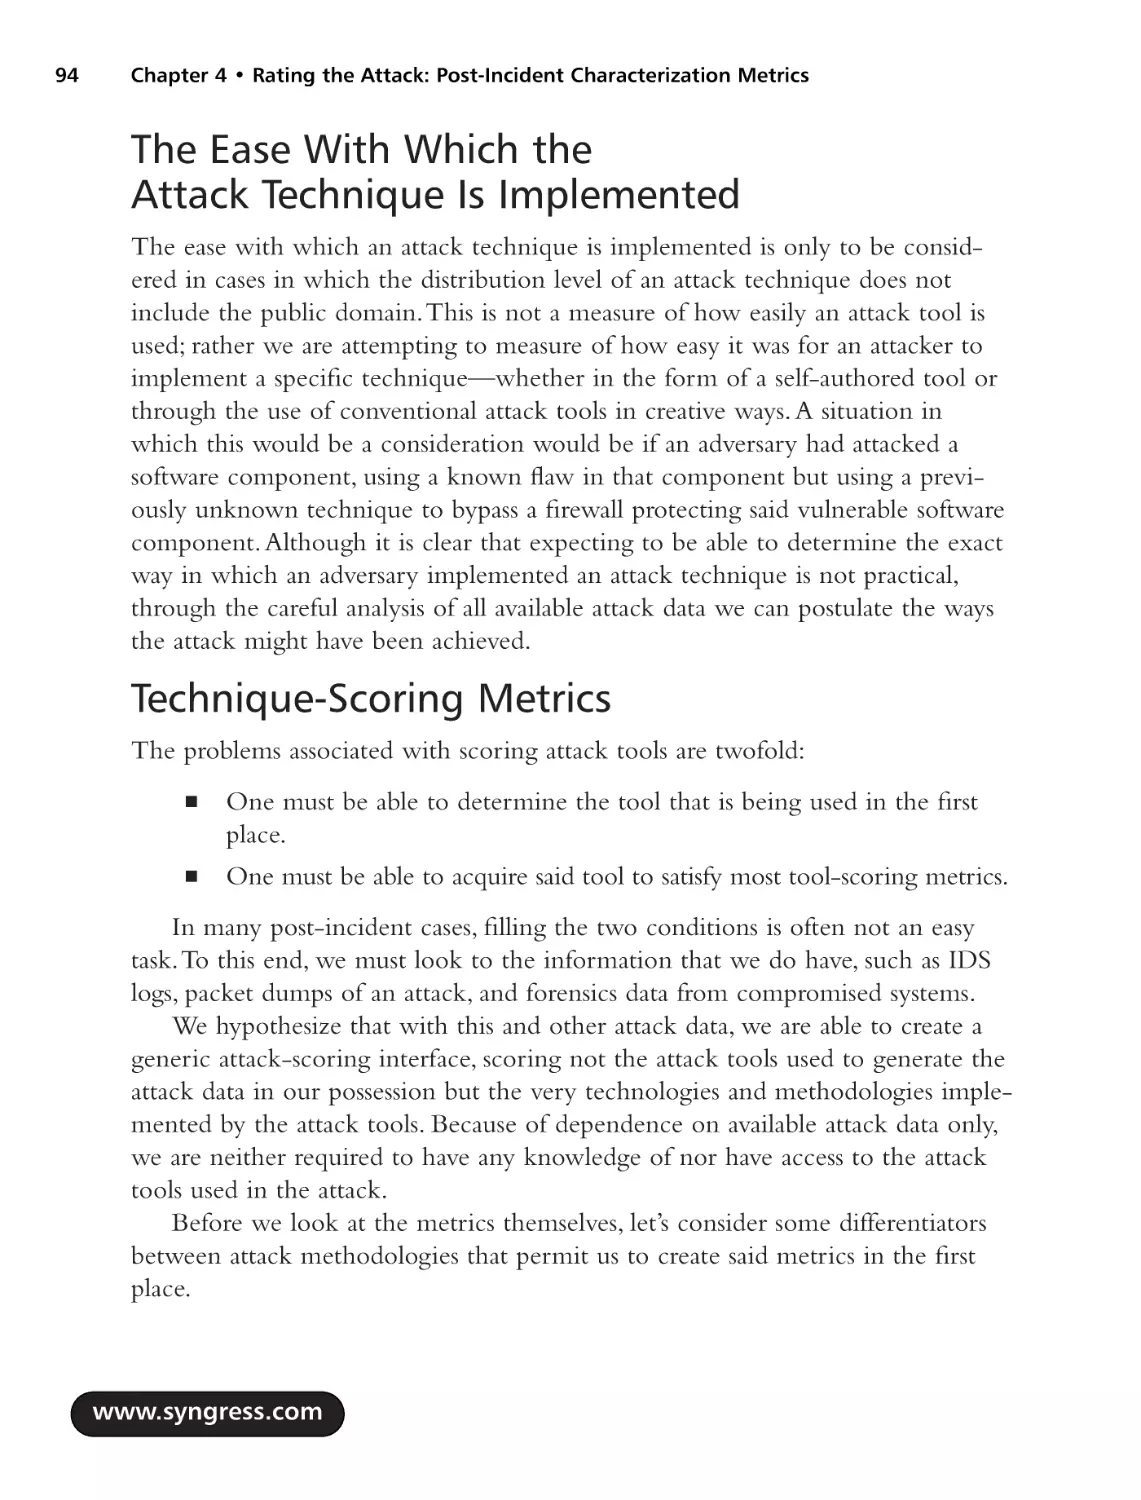 The Ease With Which the Attack Technique Is Implemented
Technique-Scoring Metrics